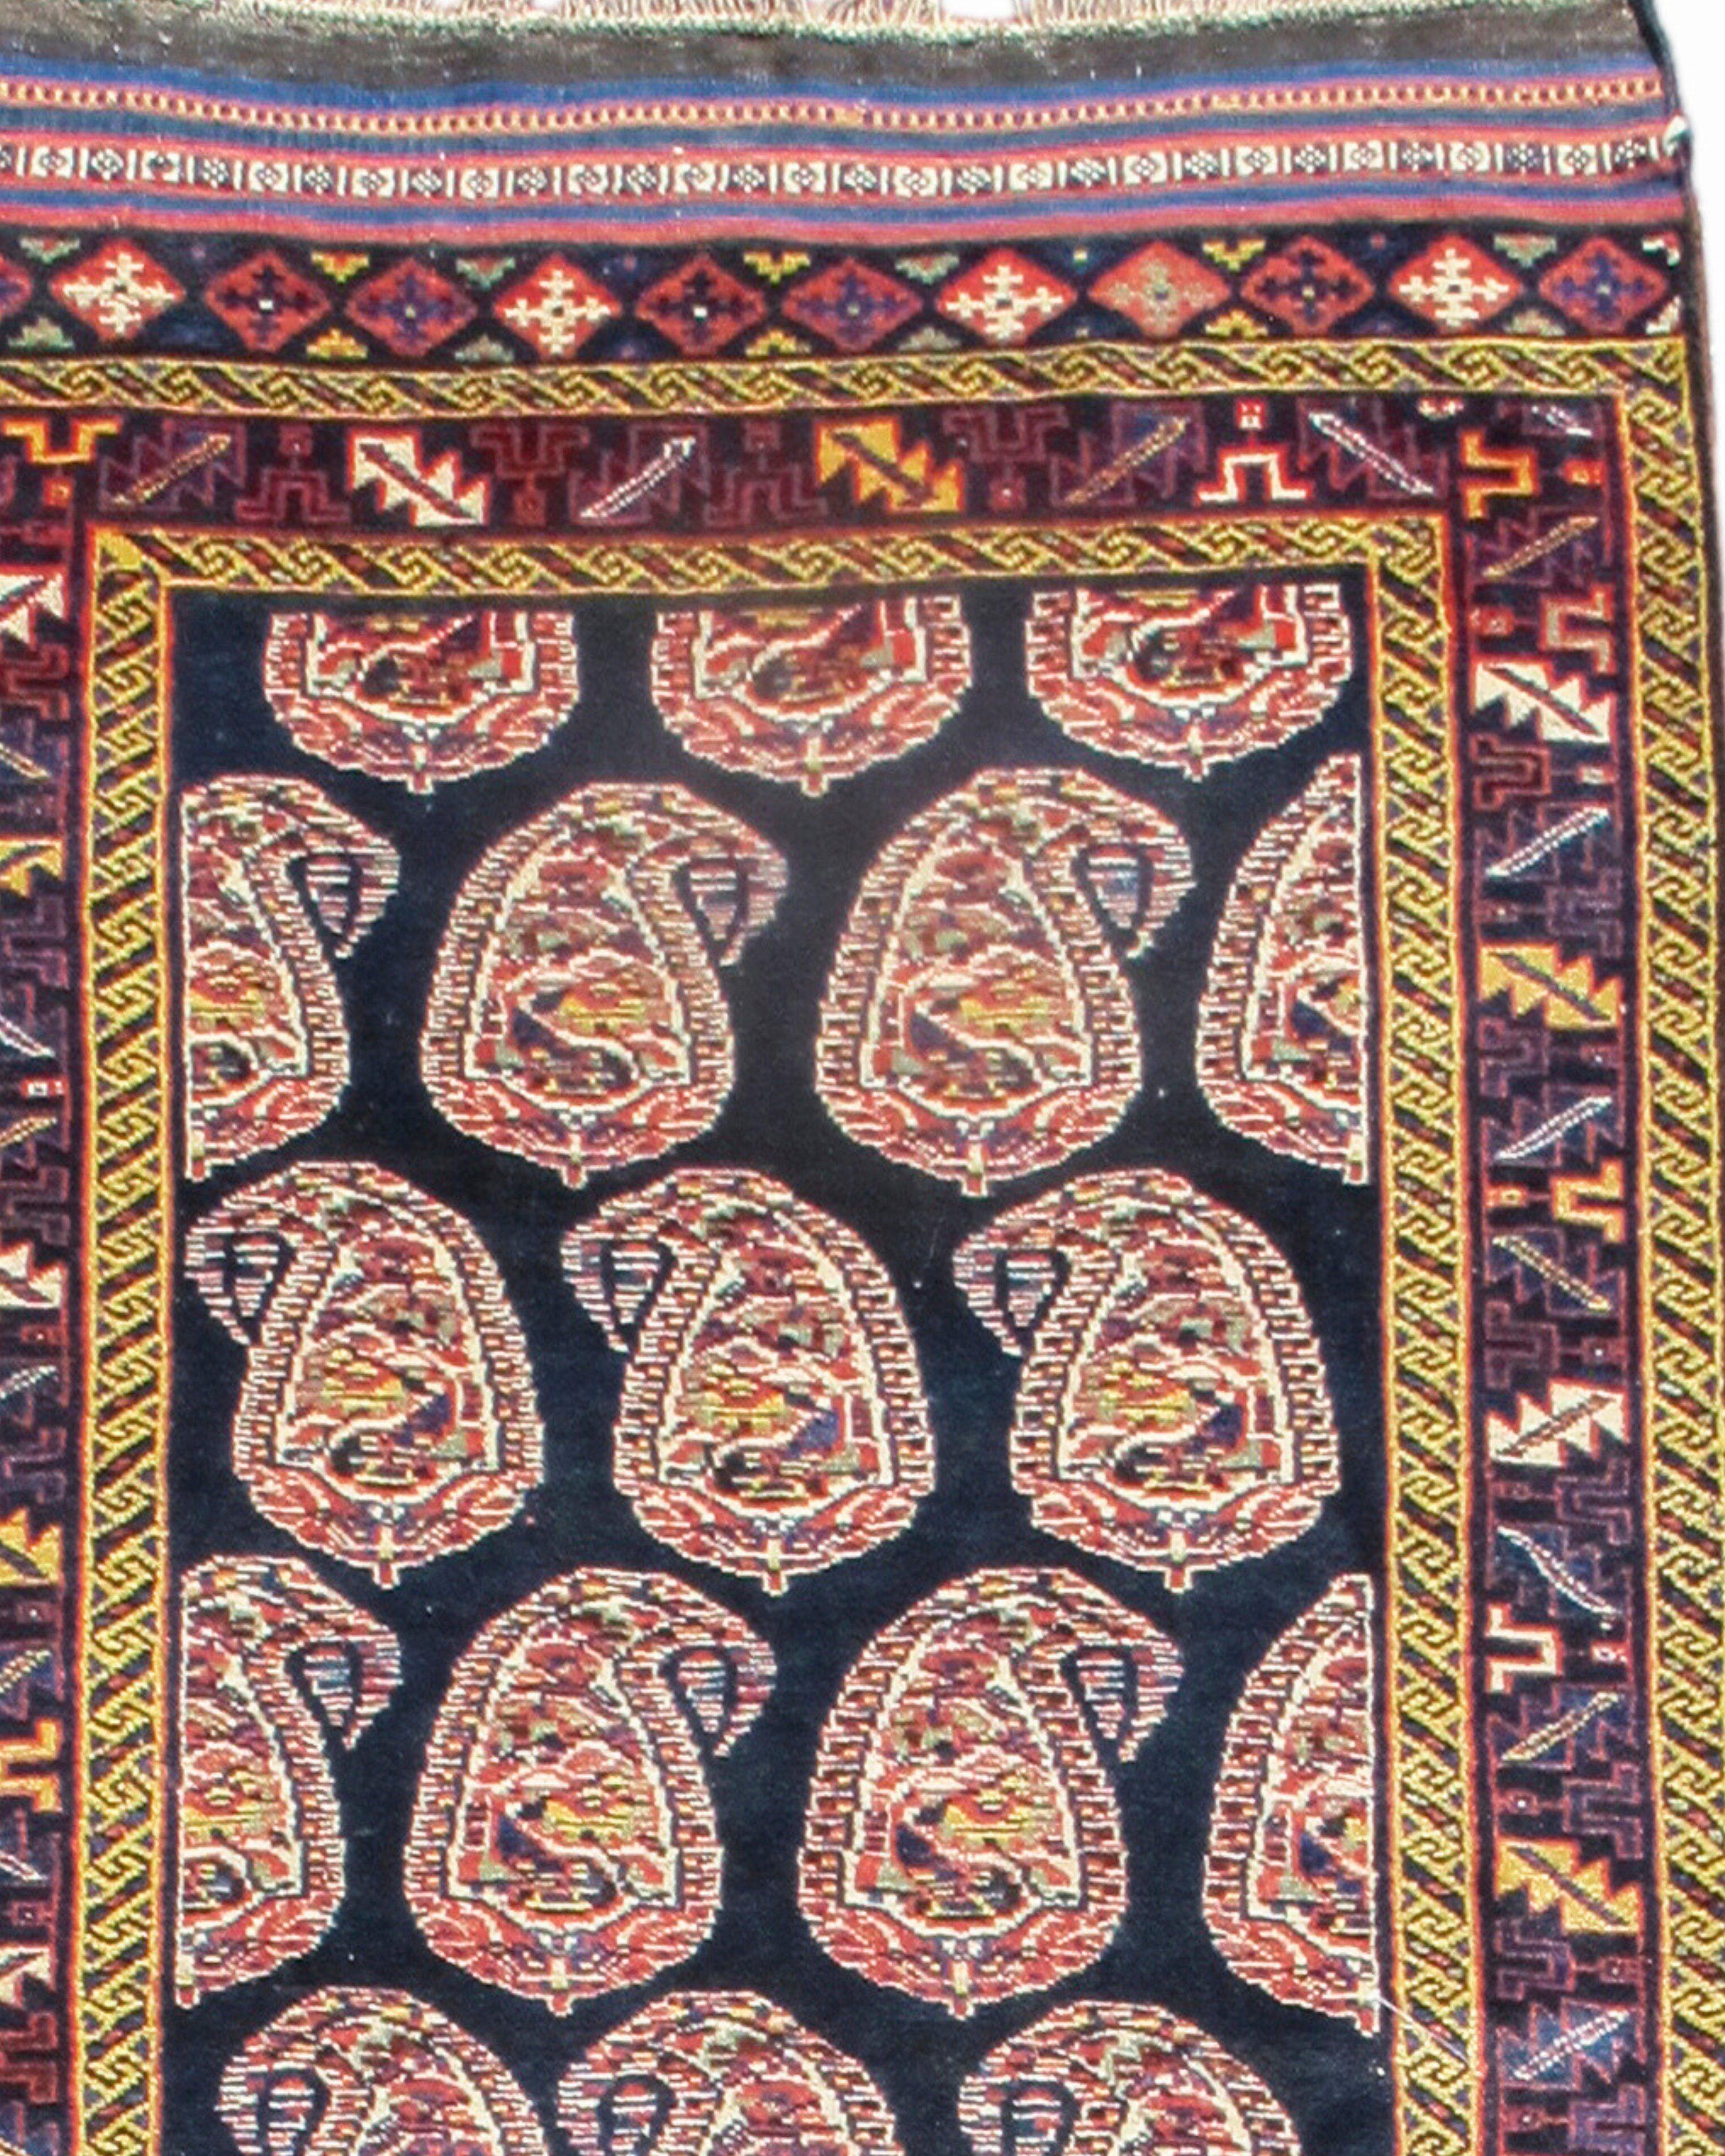 Antique Southwest Persian Luri Runner Rug, c. 1900

 One of a matching pair. Excellent original condition

Additional Information:
Dimensions: 3'9